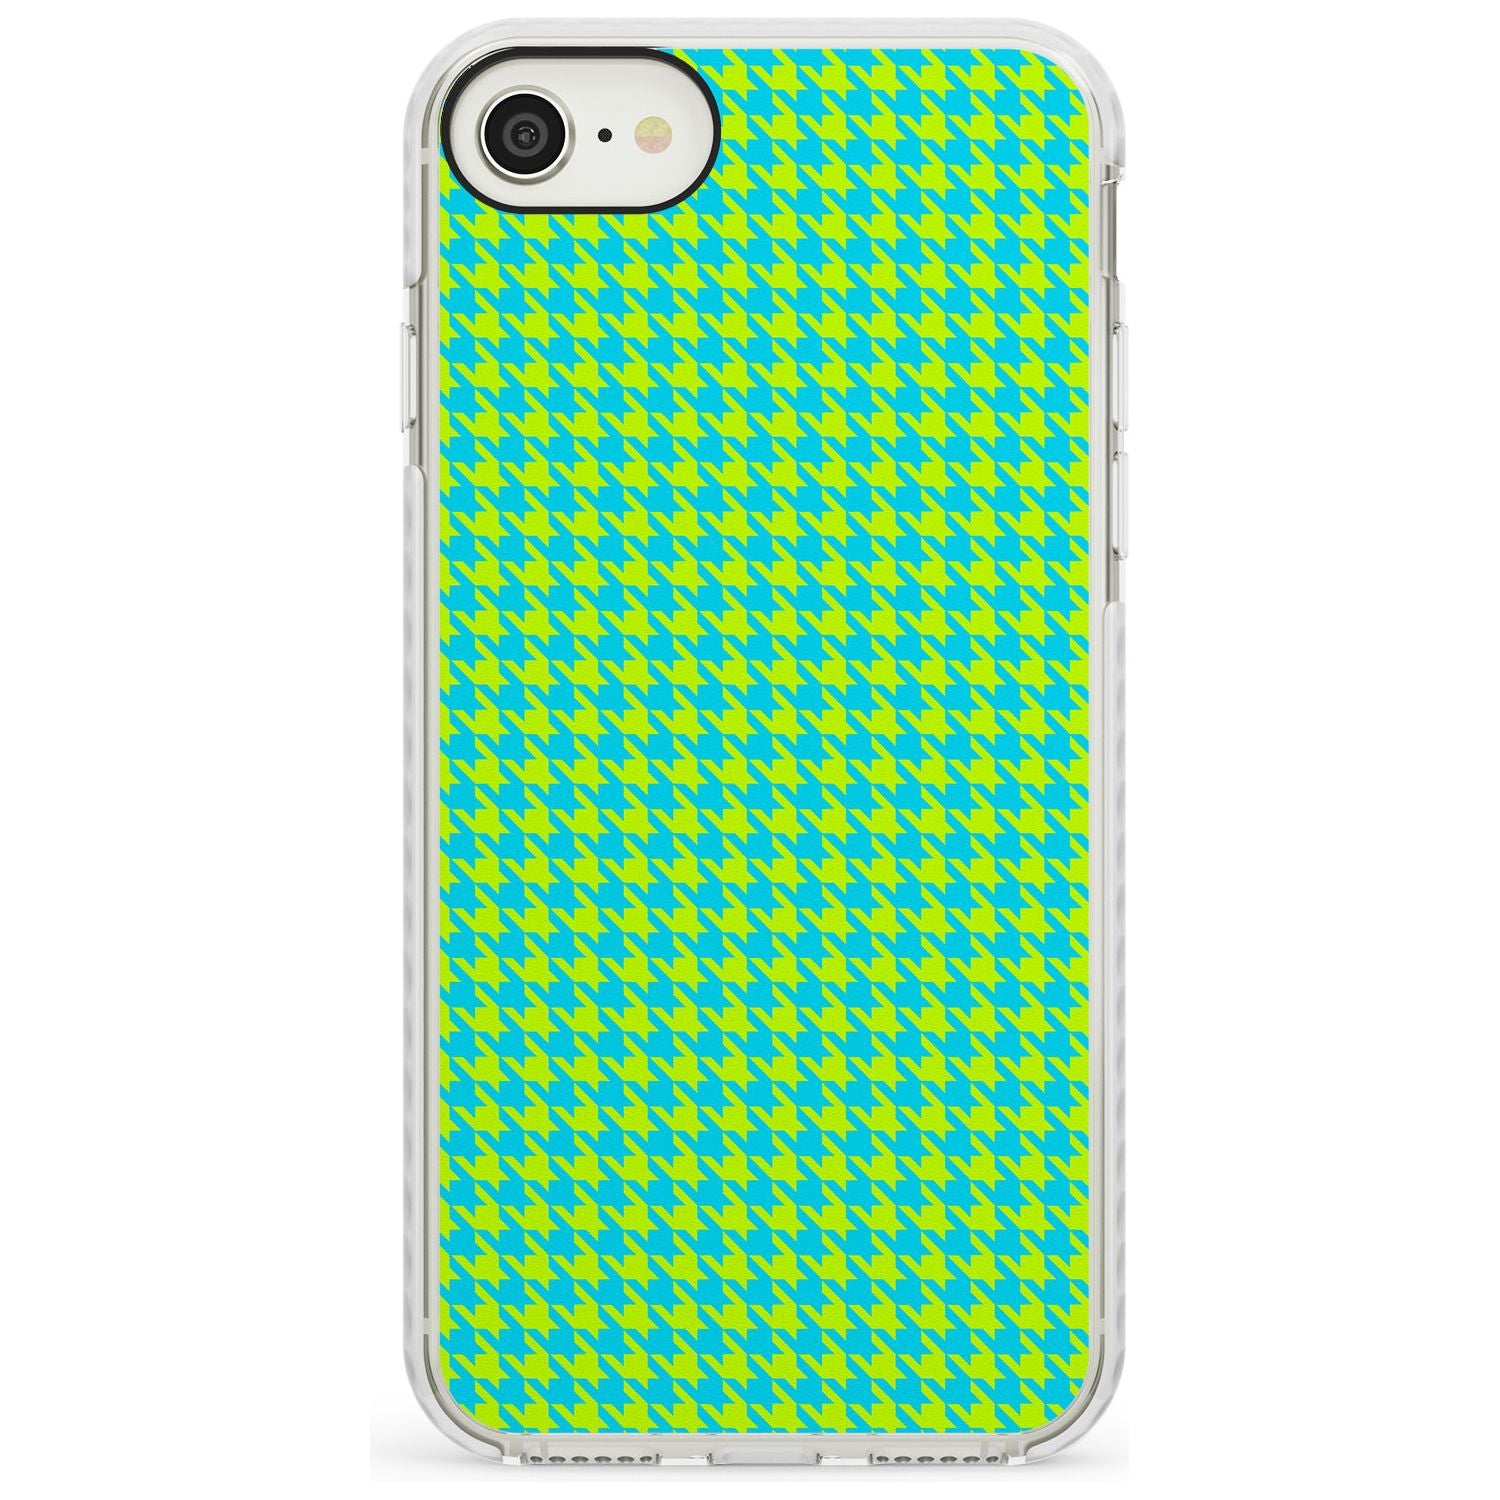 Neon Lime & Turquoise Houndstooth Pattern Impact Phone Case for iPhone SE 8 7 Plus